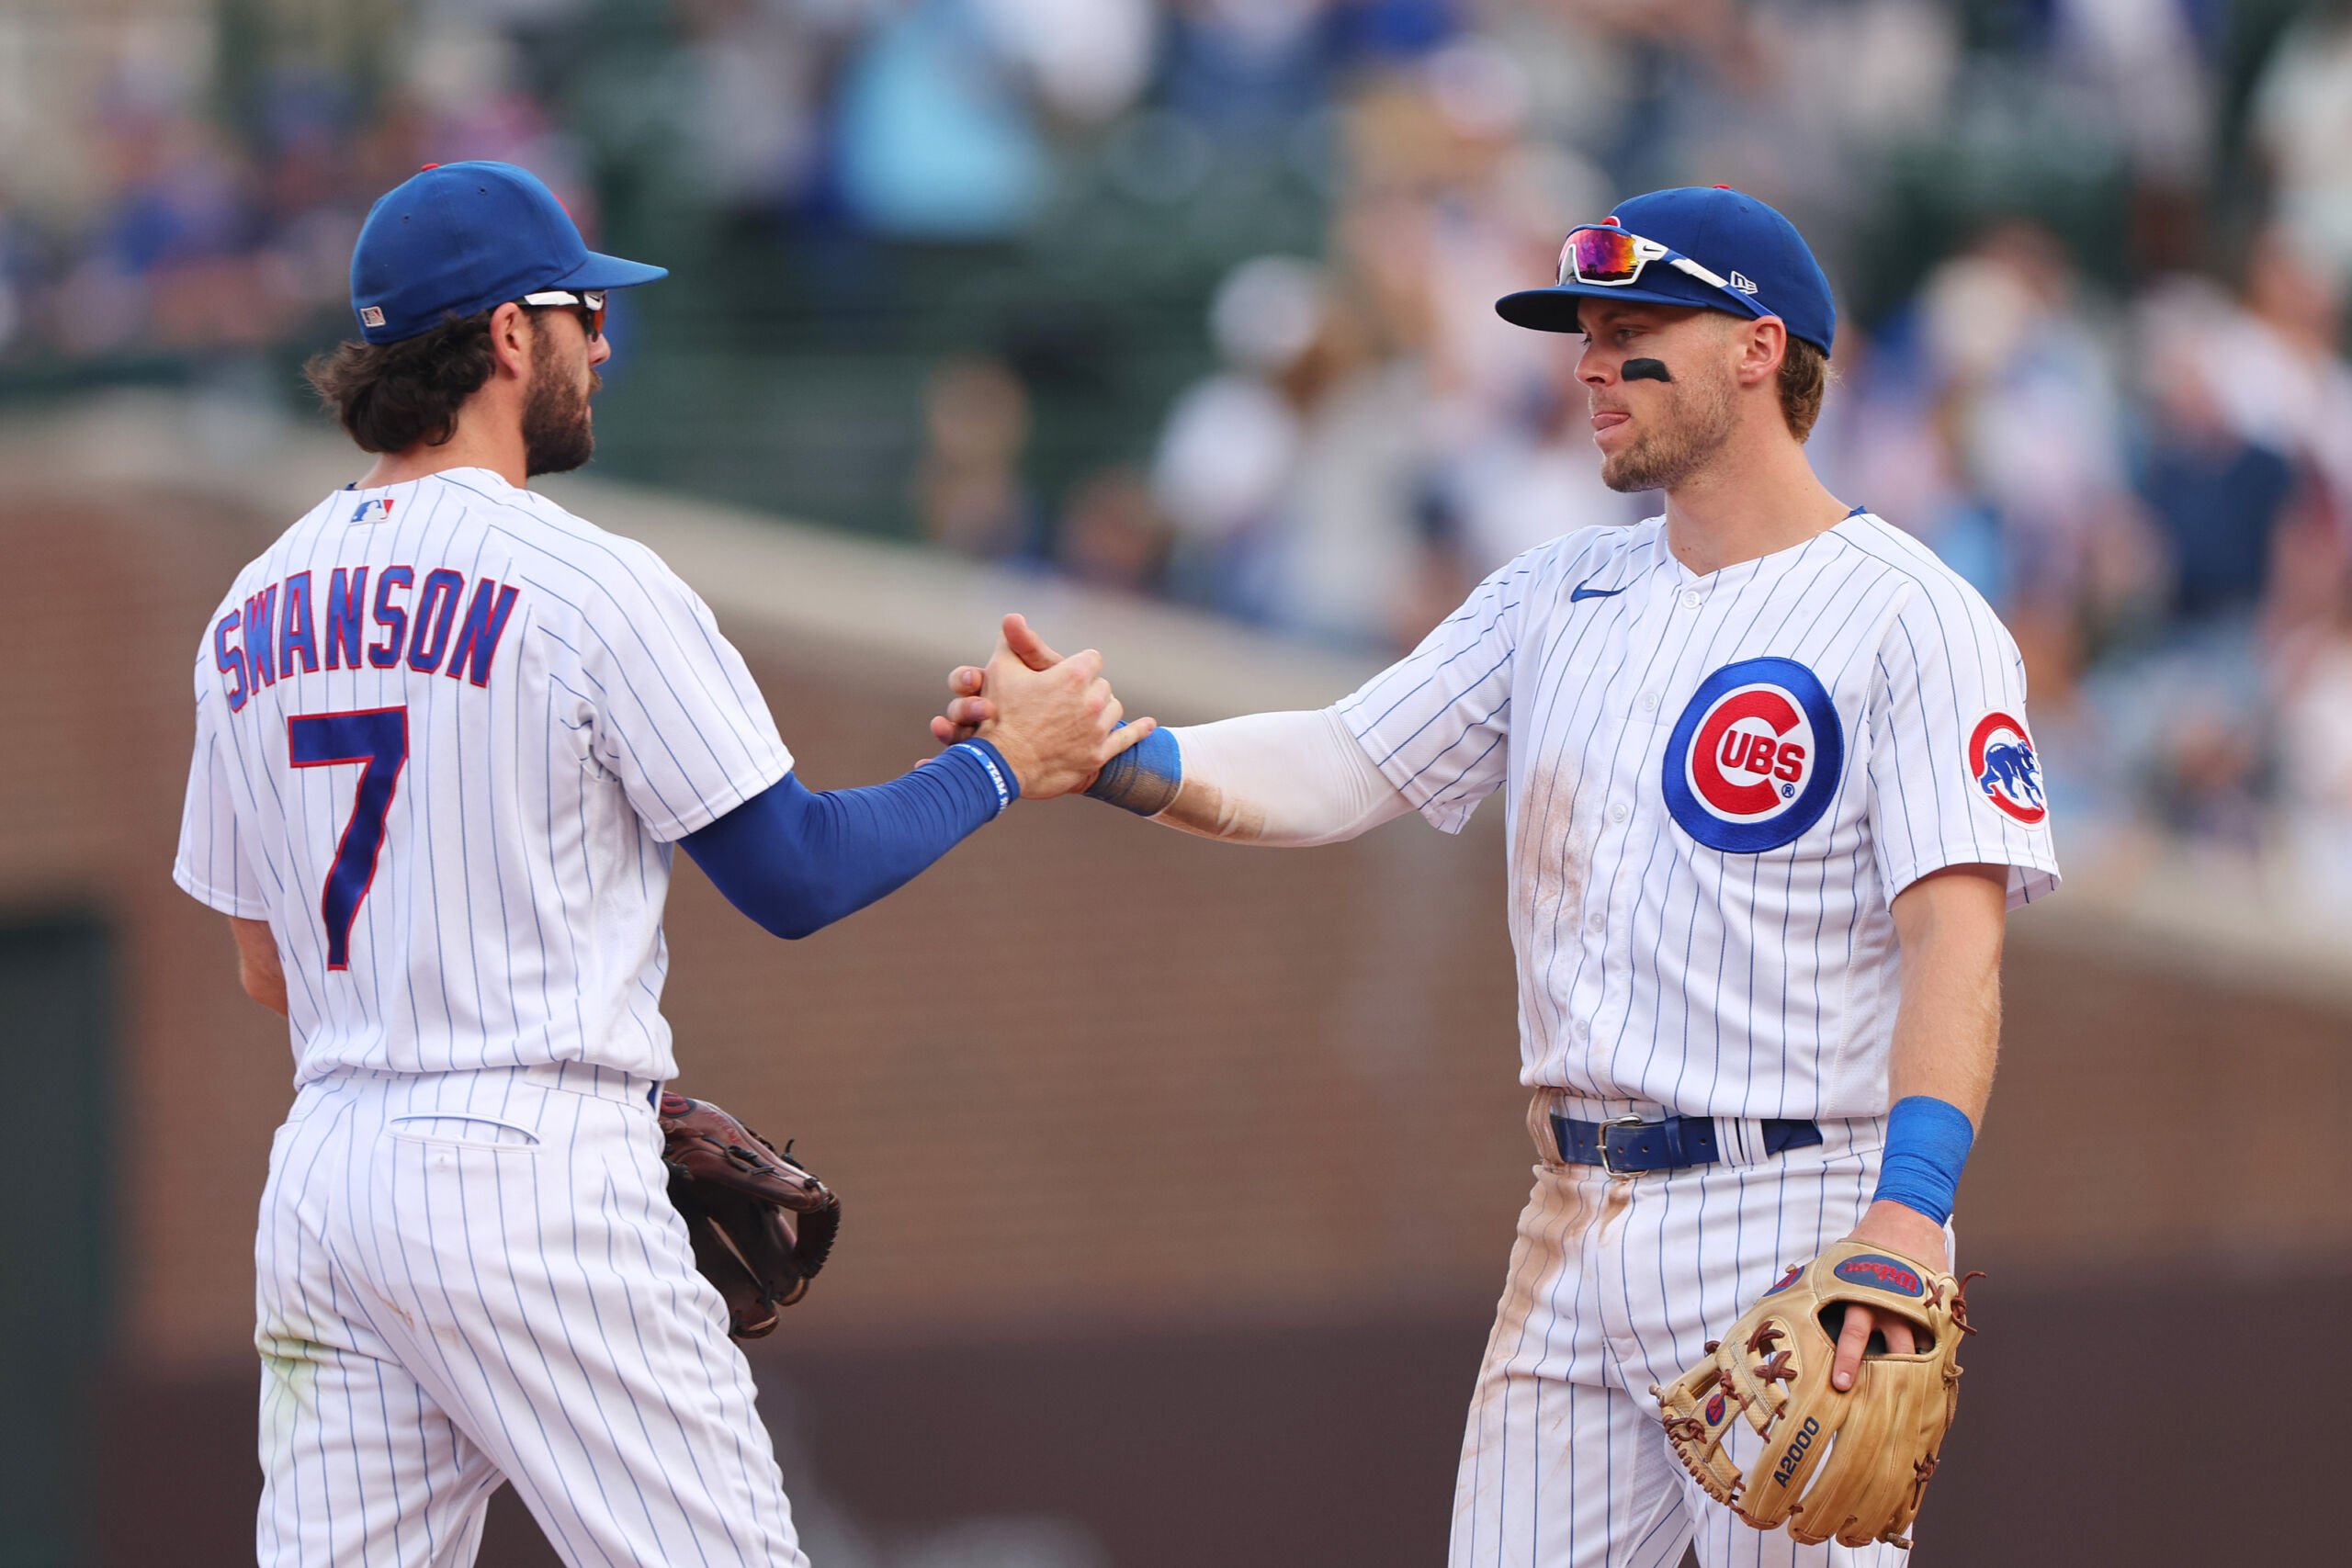 Dansby Swanson and Nico Hoerner of the Chicago Cubs celebrate